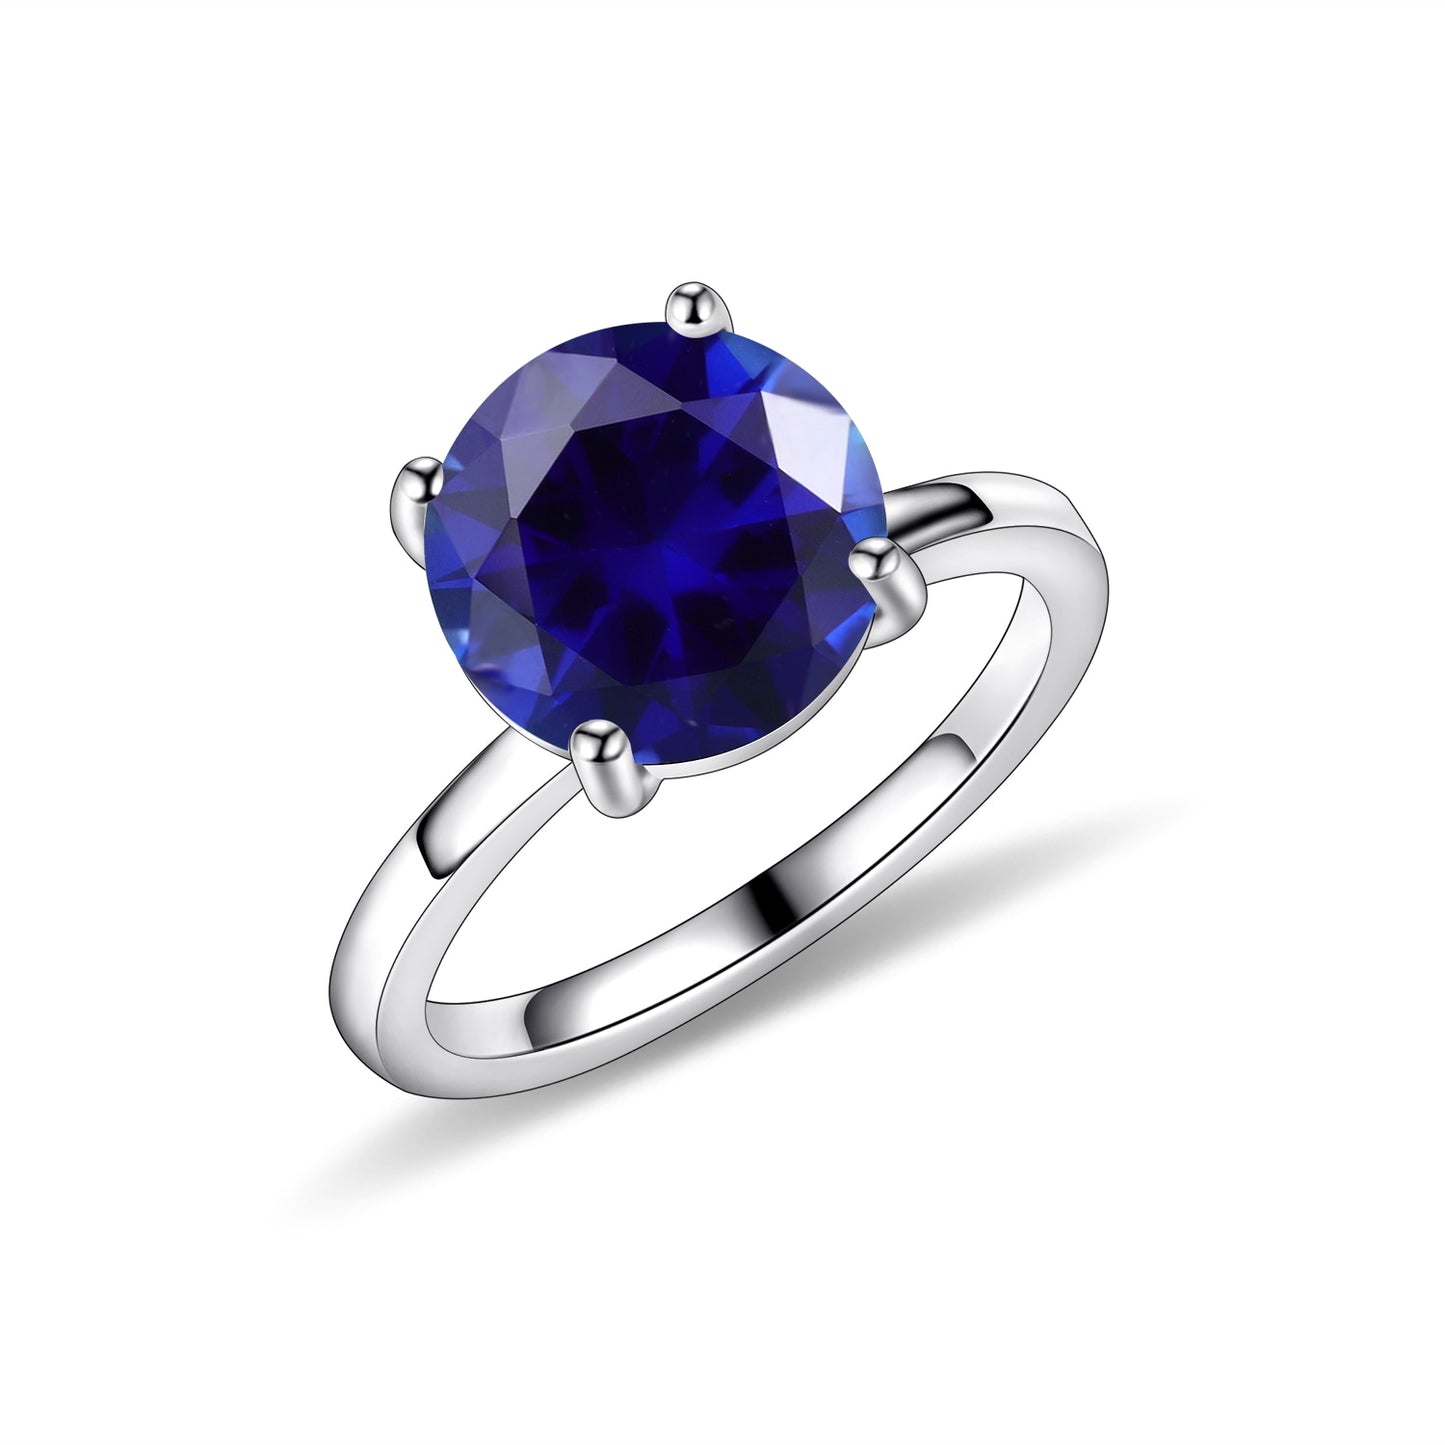 GEM'S BALLET Round Lab Blue Sapphire Four Prong Solitaire Engagement Rings 925 Sterling Silver Gemstone Ring Gift For Her lab Sapphire - S|10mm